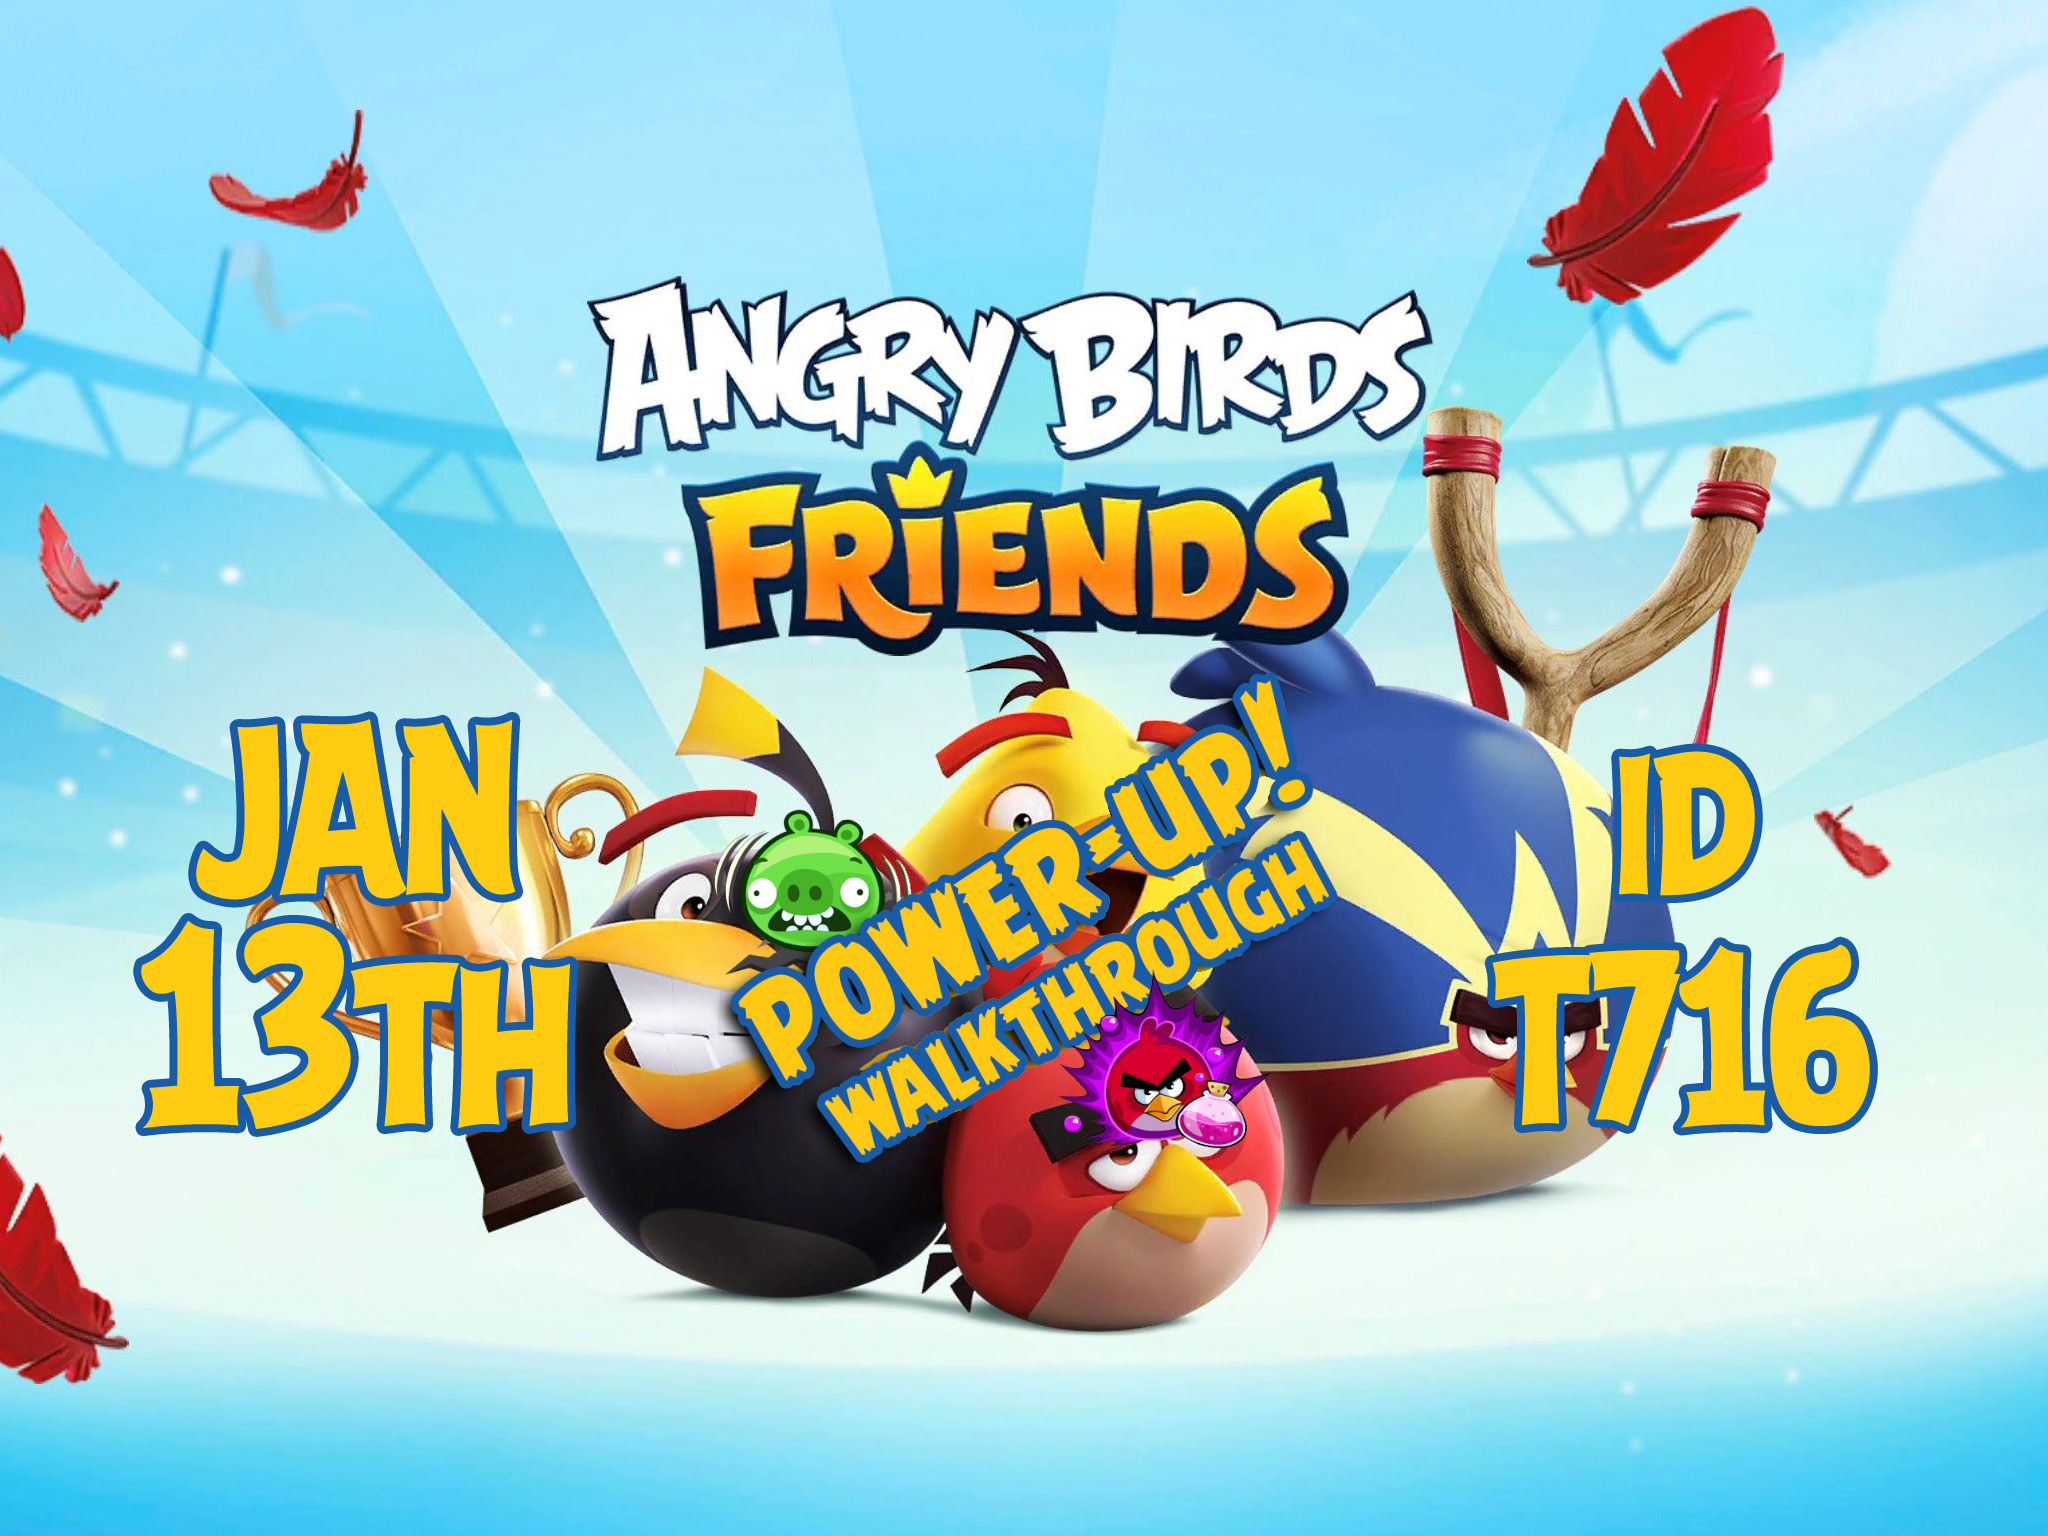 Angry-Birds-Friends-Tournament-T716-Feature-Image-PU